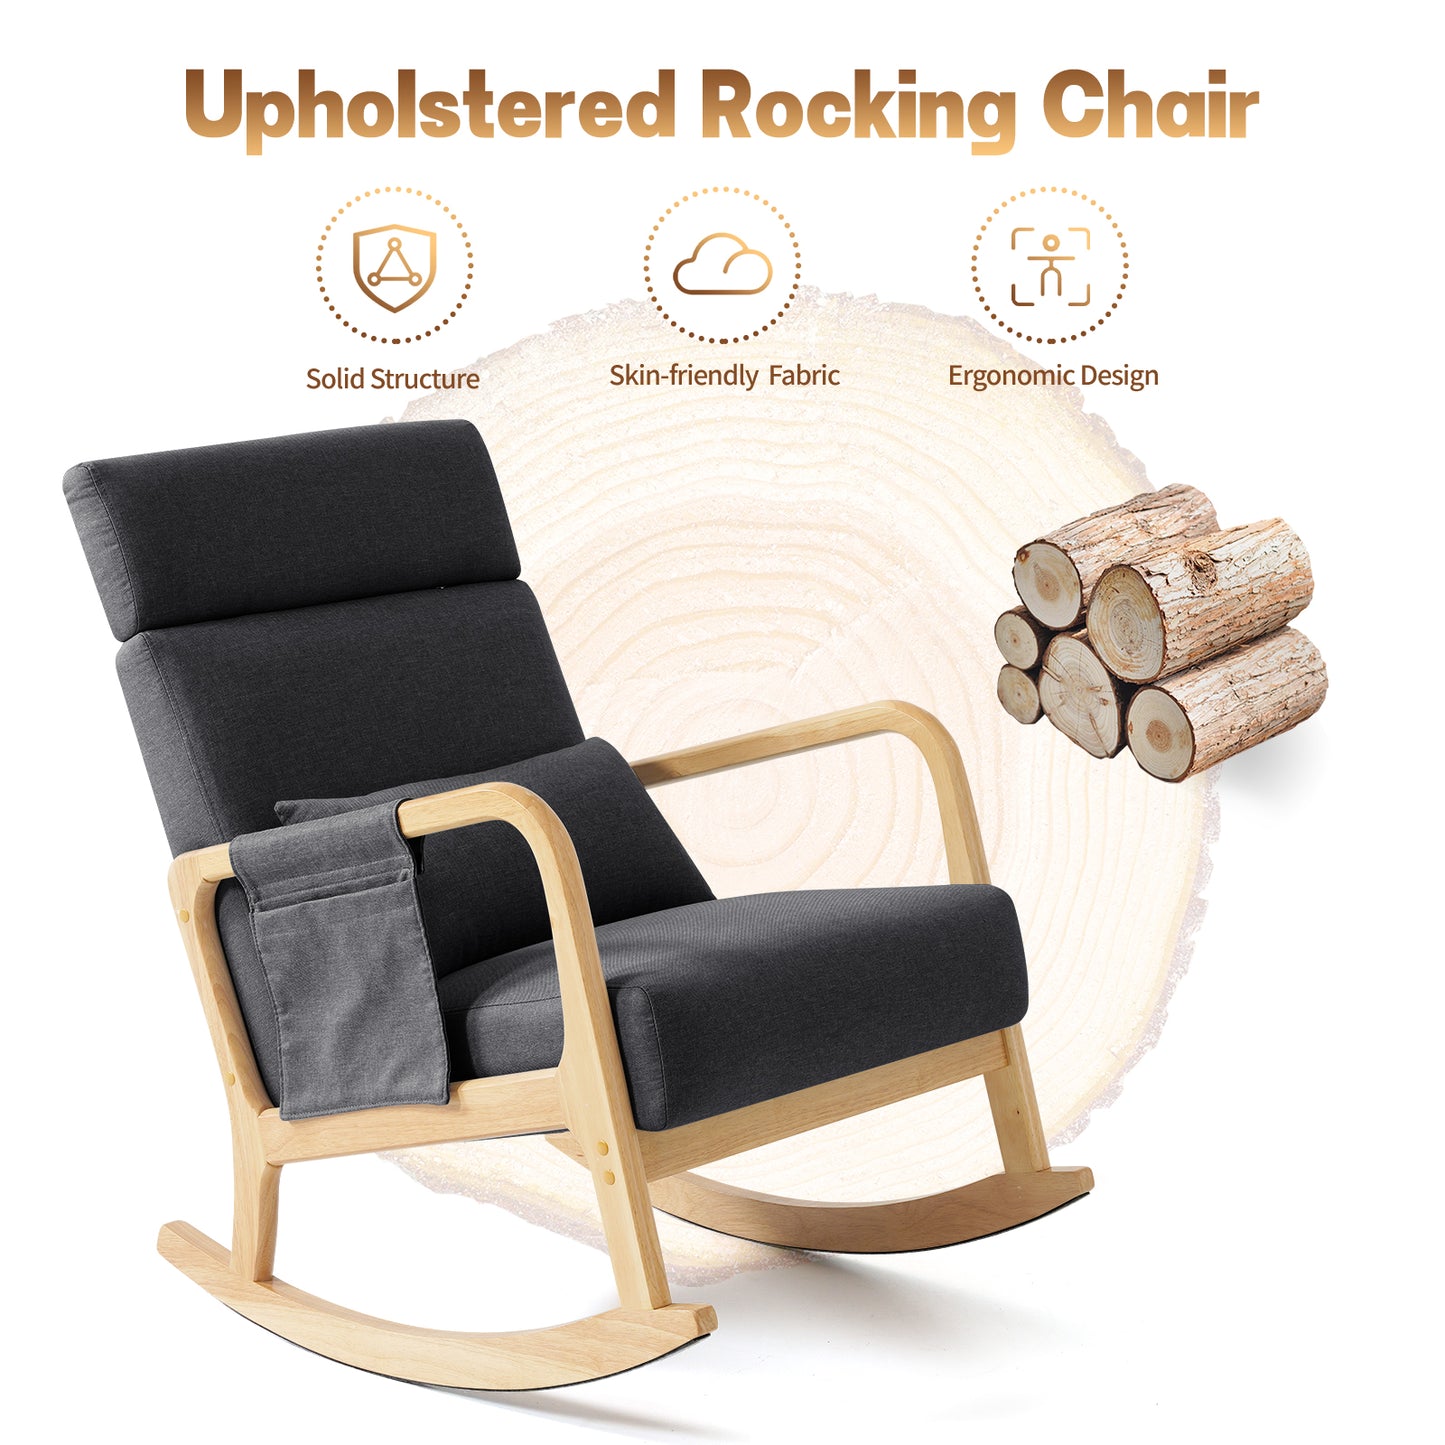 Roomy Wooden Rocking Chair Living Room for Nursery Rocking Chairs , Nursery for Nursery Chair for Baby/Kids Bedroom, Nursing Chair with High Backrest+Side Pockets